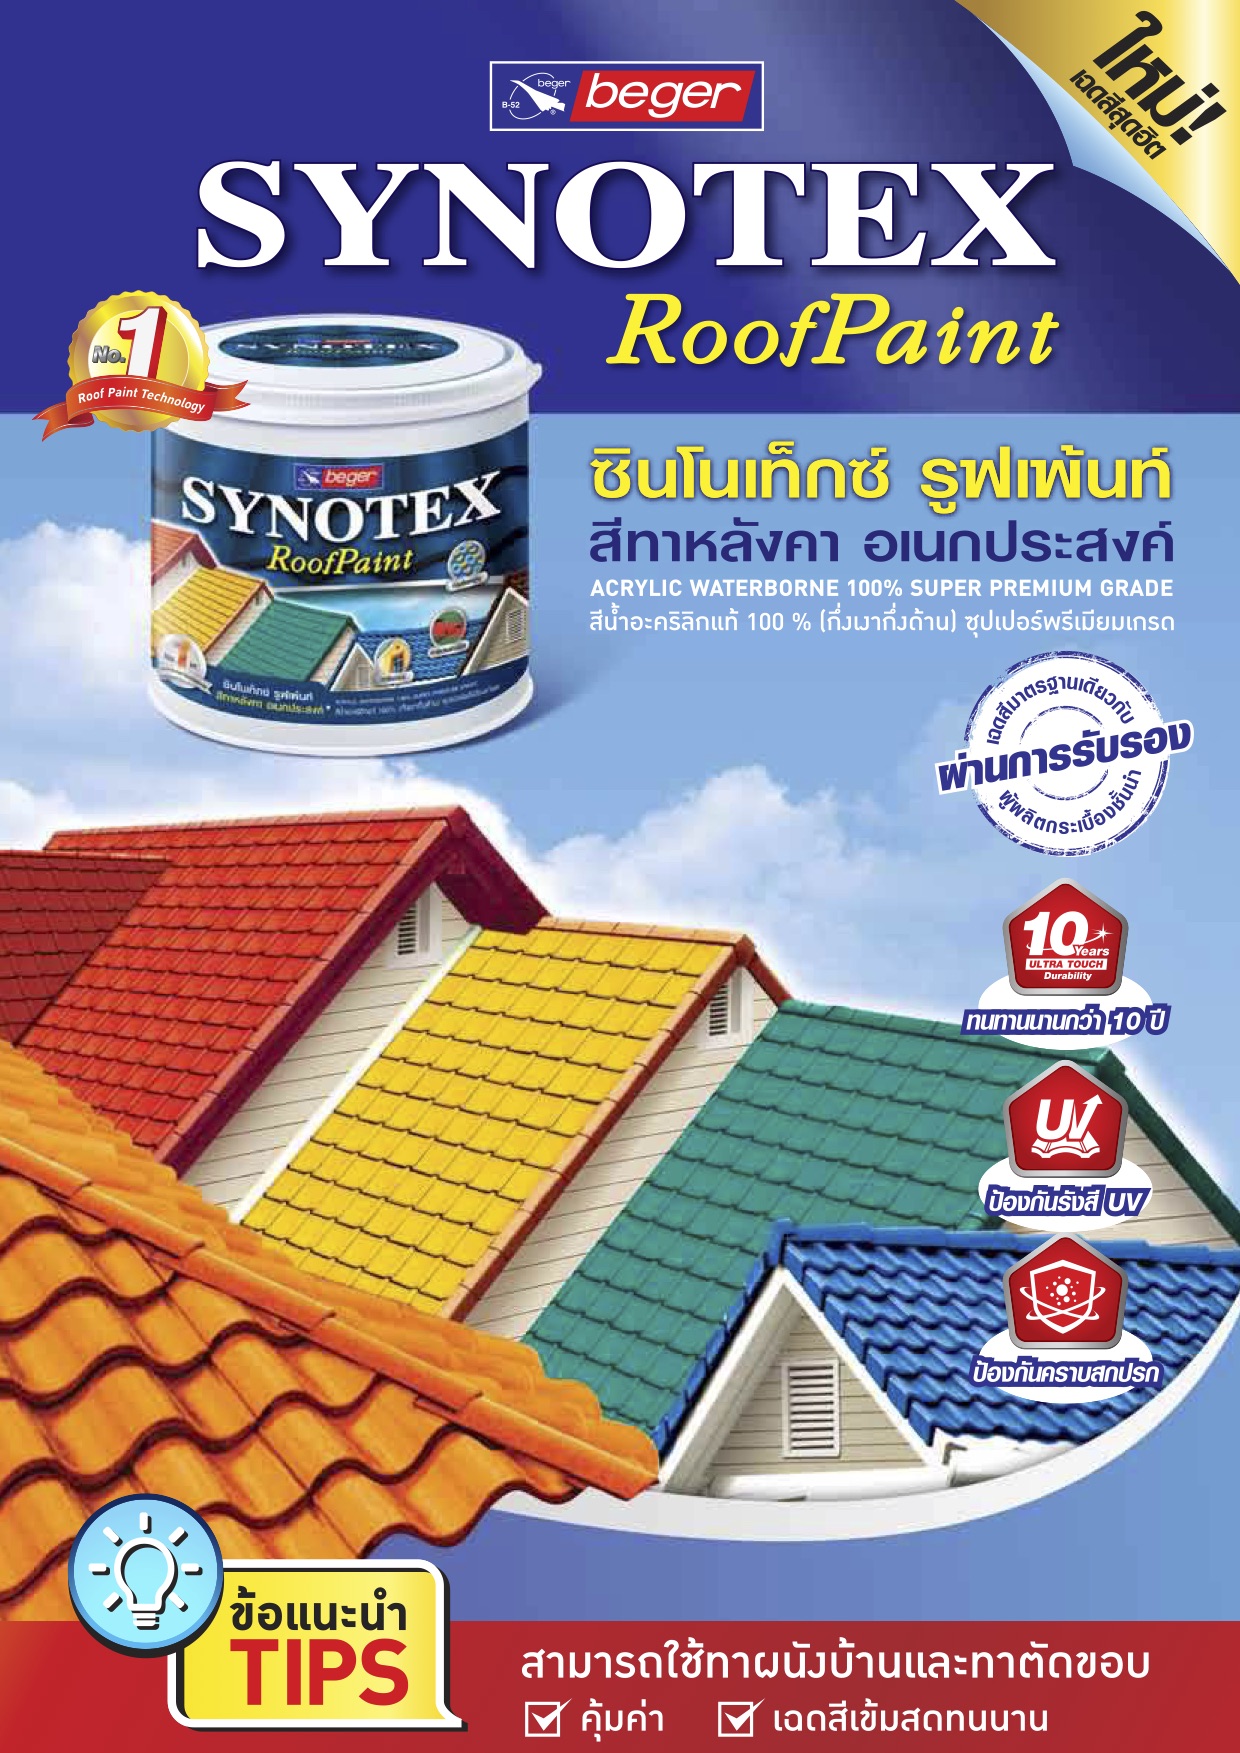 Beger Synotex RoofPaint